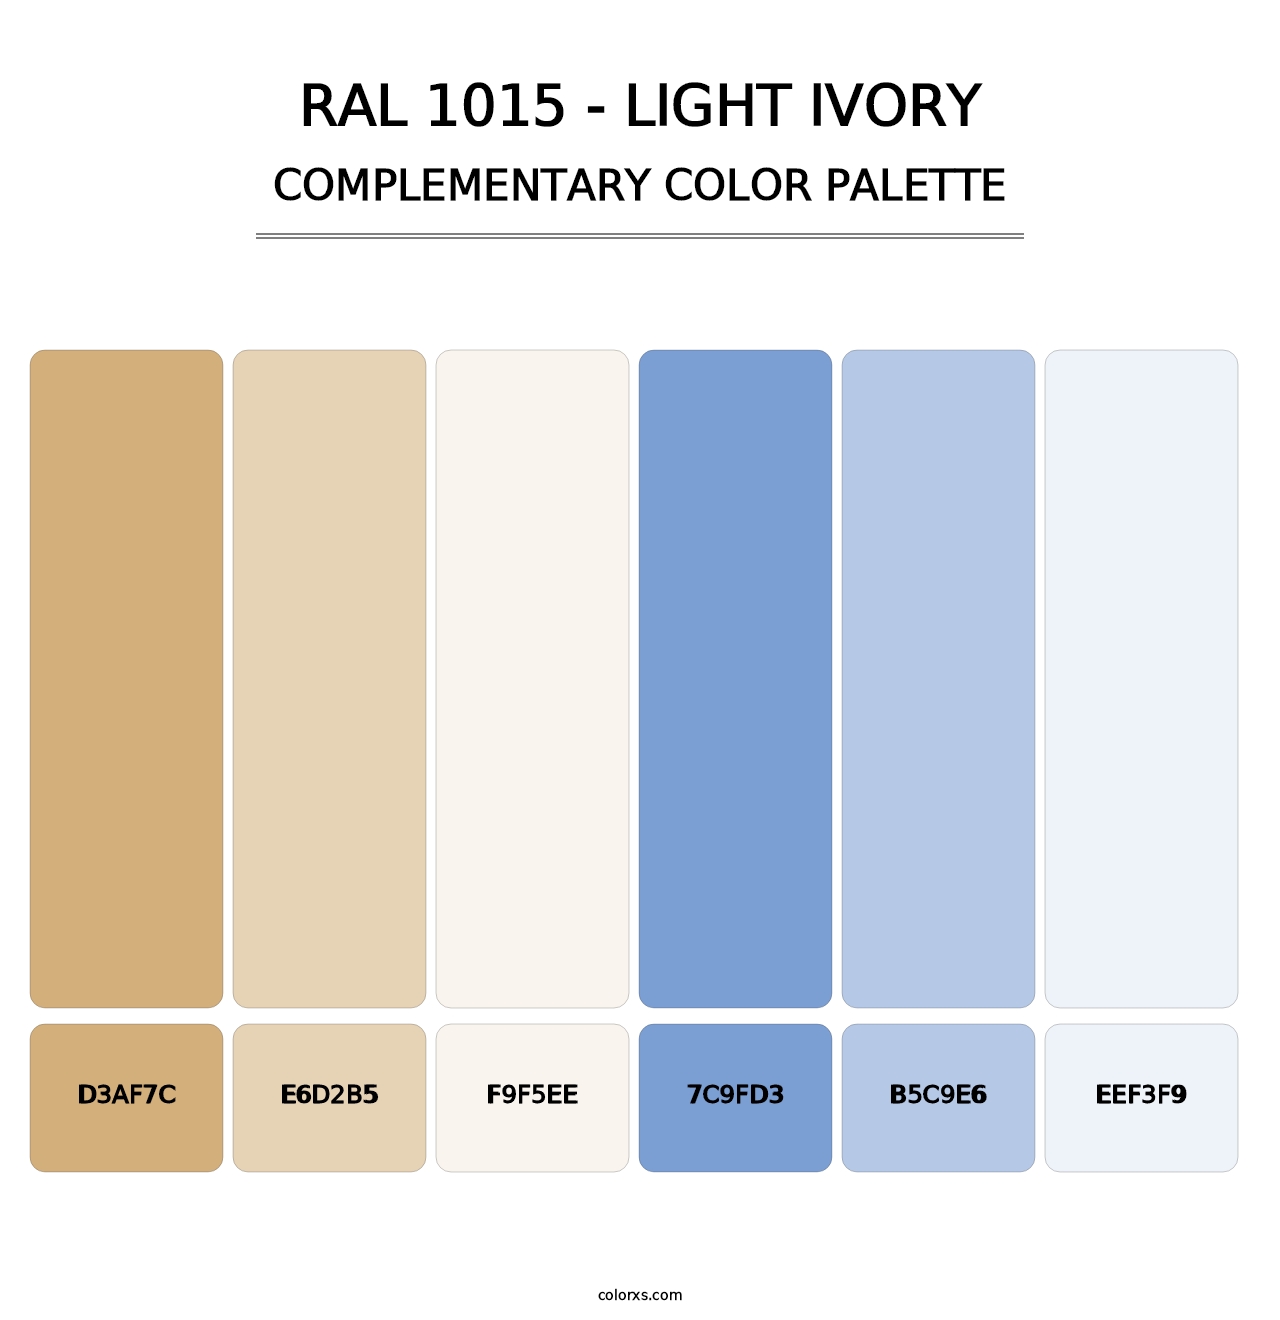 RAL 1015 - Light Ivory - Complementary Color Palette